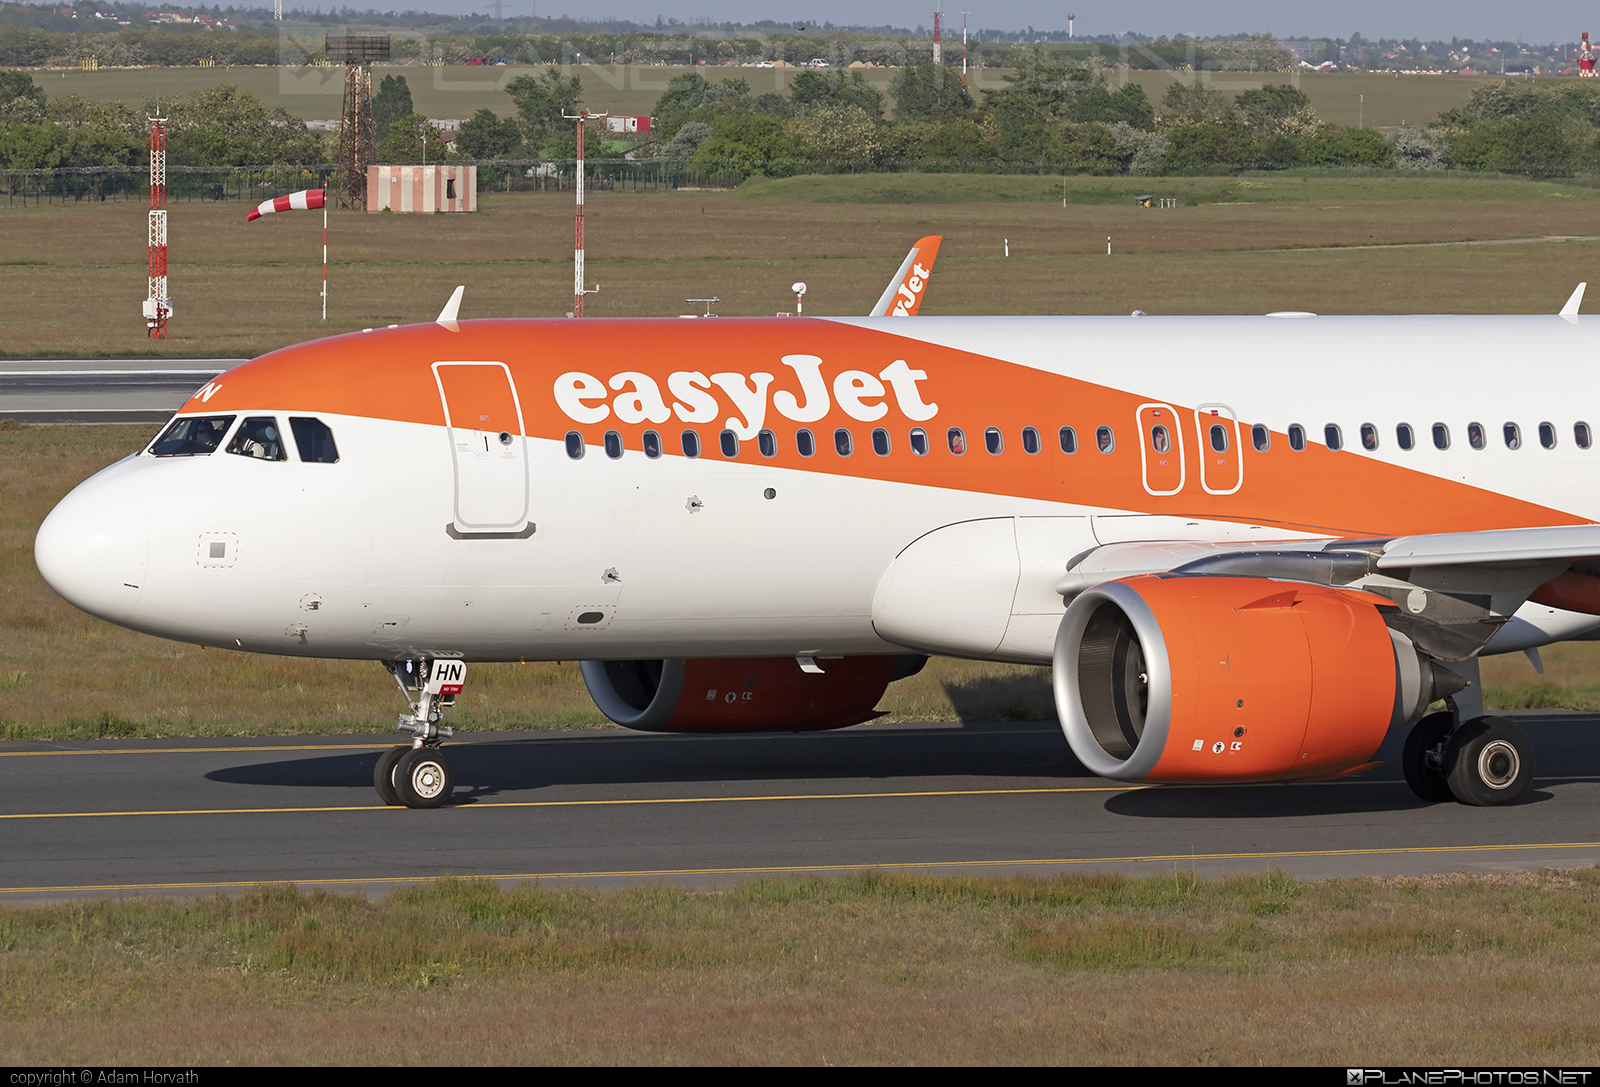 Airbus A320-251N - G-UZHN operated by easyJet #a320 #a320family #a320neo #airbus #airbus320 #easyjet